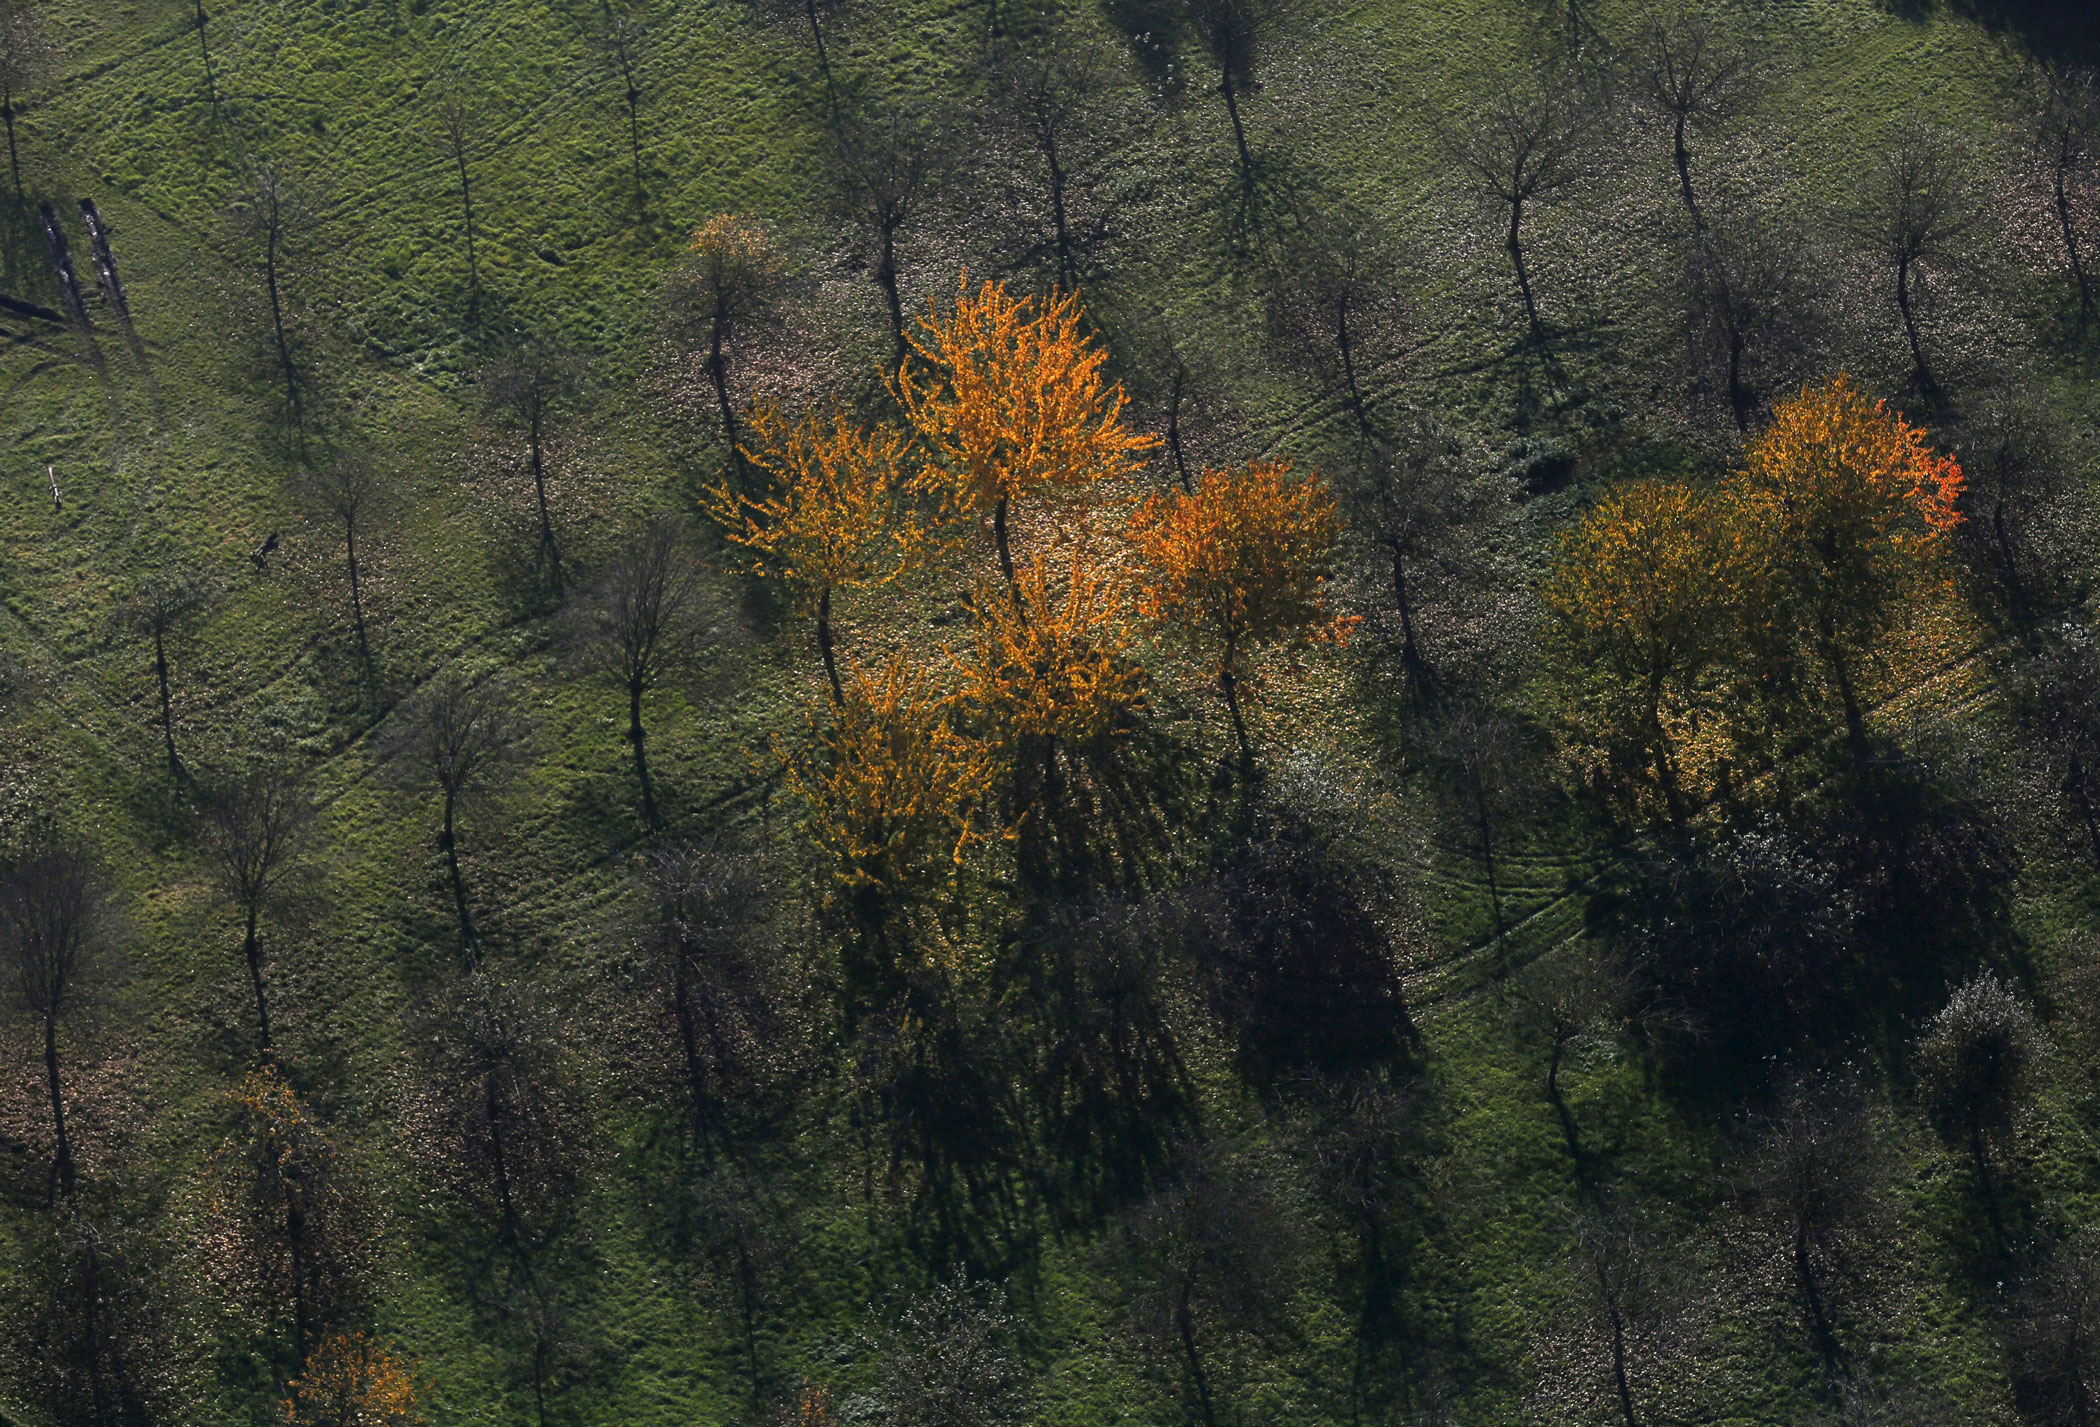 An aerial view shows a field with deciduous trees on a sunny autumn day in Recklinghausen, Germany on Oct. 31, 2015.